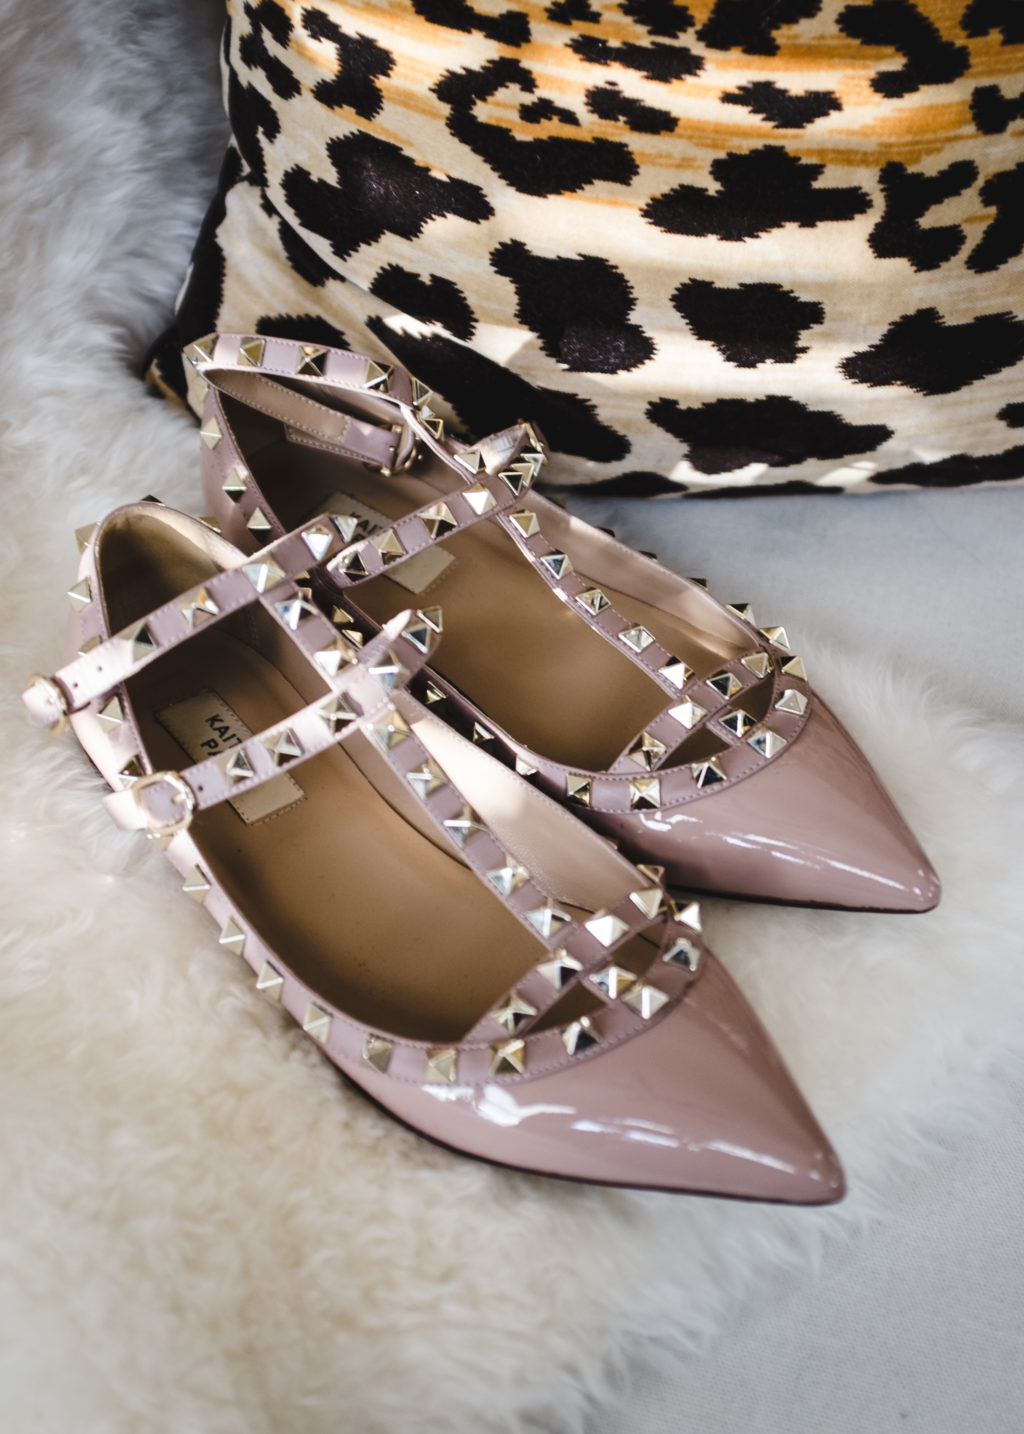 The Look for Less: Flats | The Teacher Diva: a Dallas Fashion Blog Beauty & Lifestyle